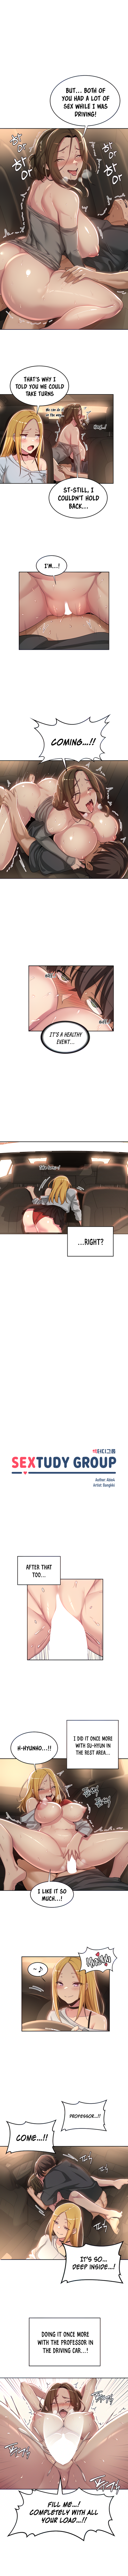 Panel Image 1 for chapter 48 of manhwa Sex Study Group on read.oppai.stream